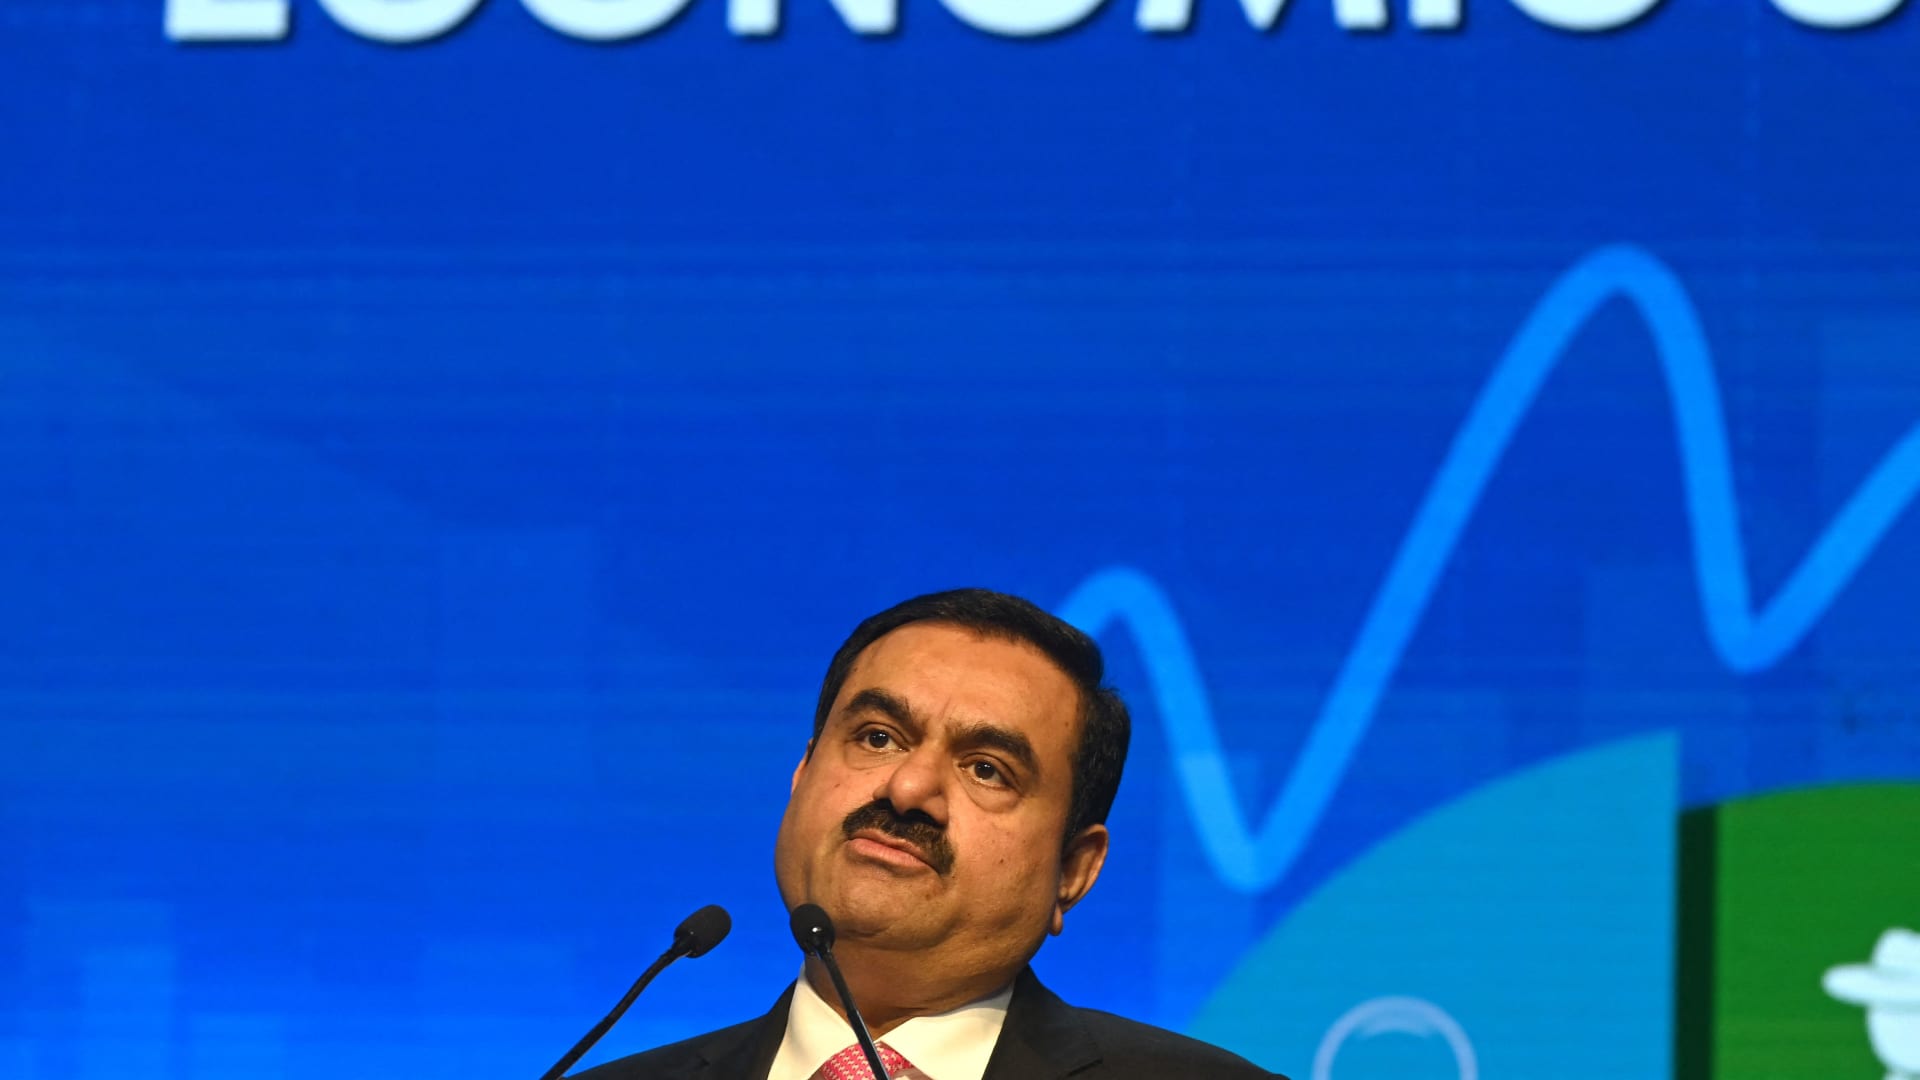 Most Adani shares continue bloodbath as Asia’s richest man loses  billion in a month